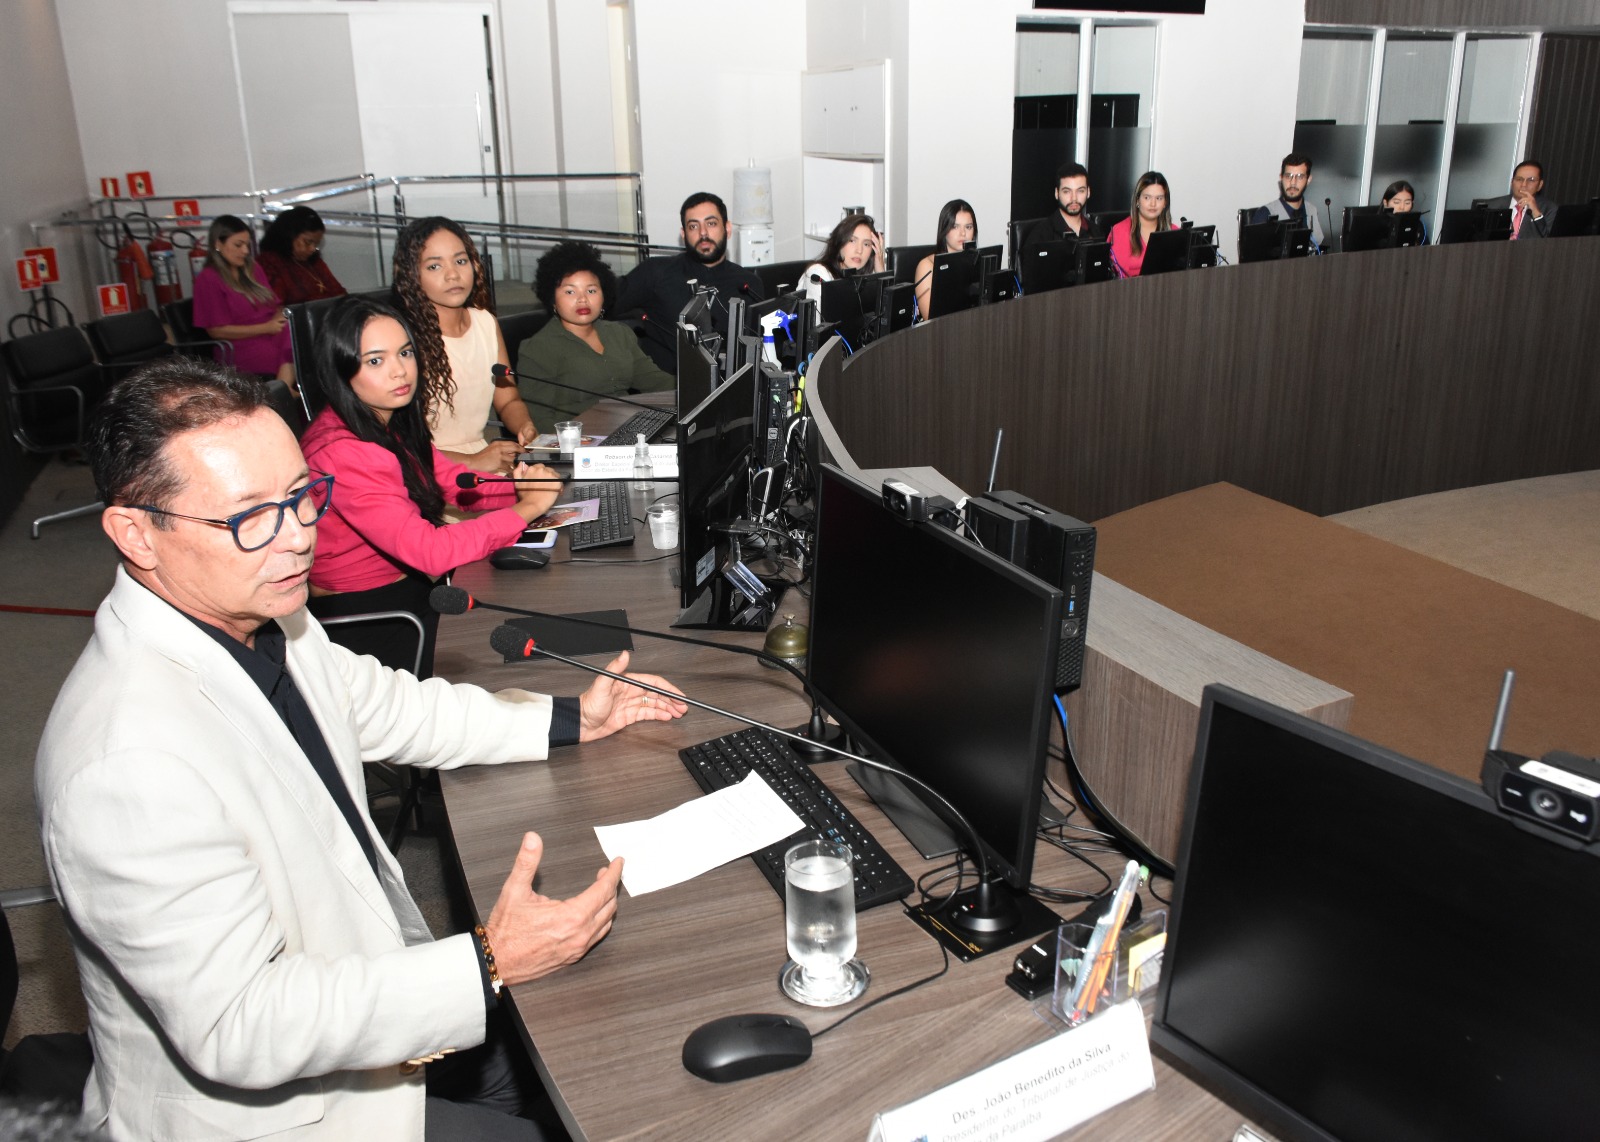 The “Knowledge of the Judiciary” program takes students from the UFCG de Sousa law course